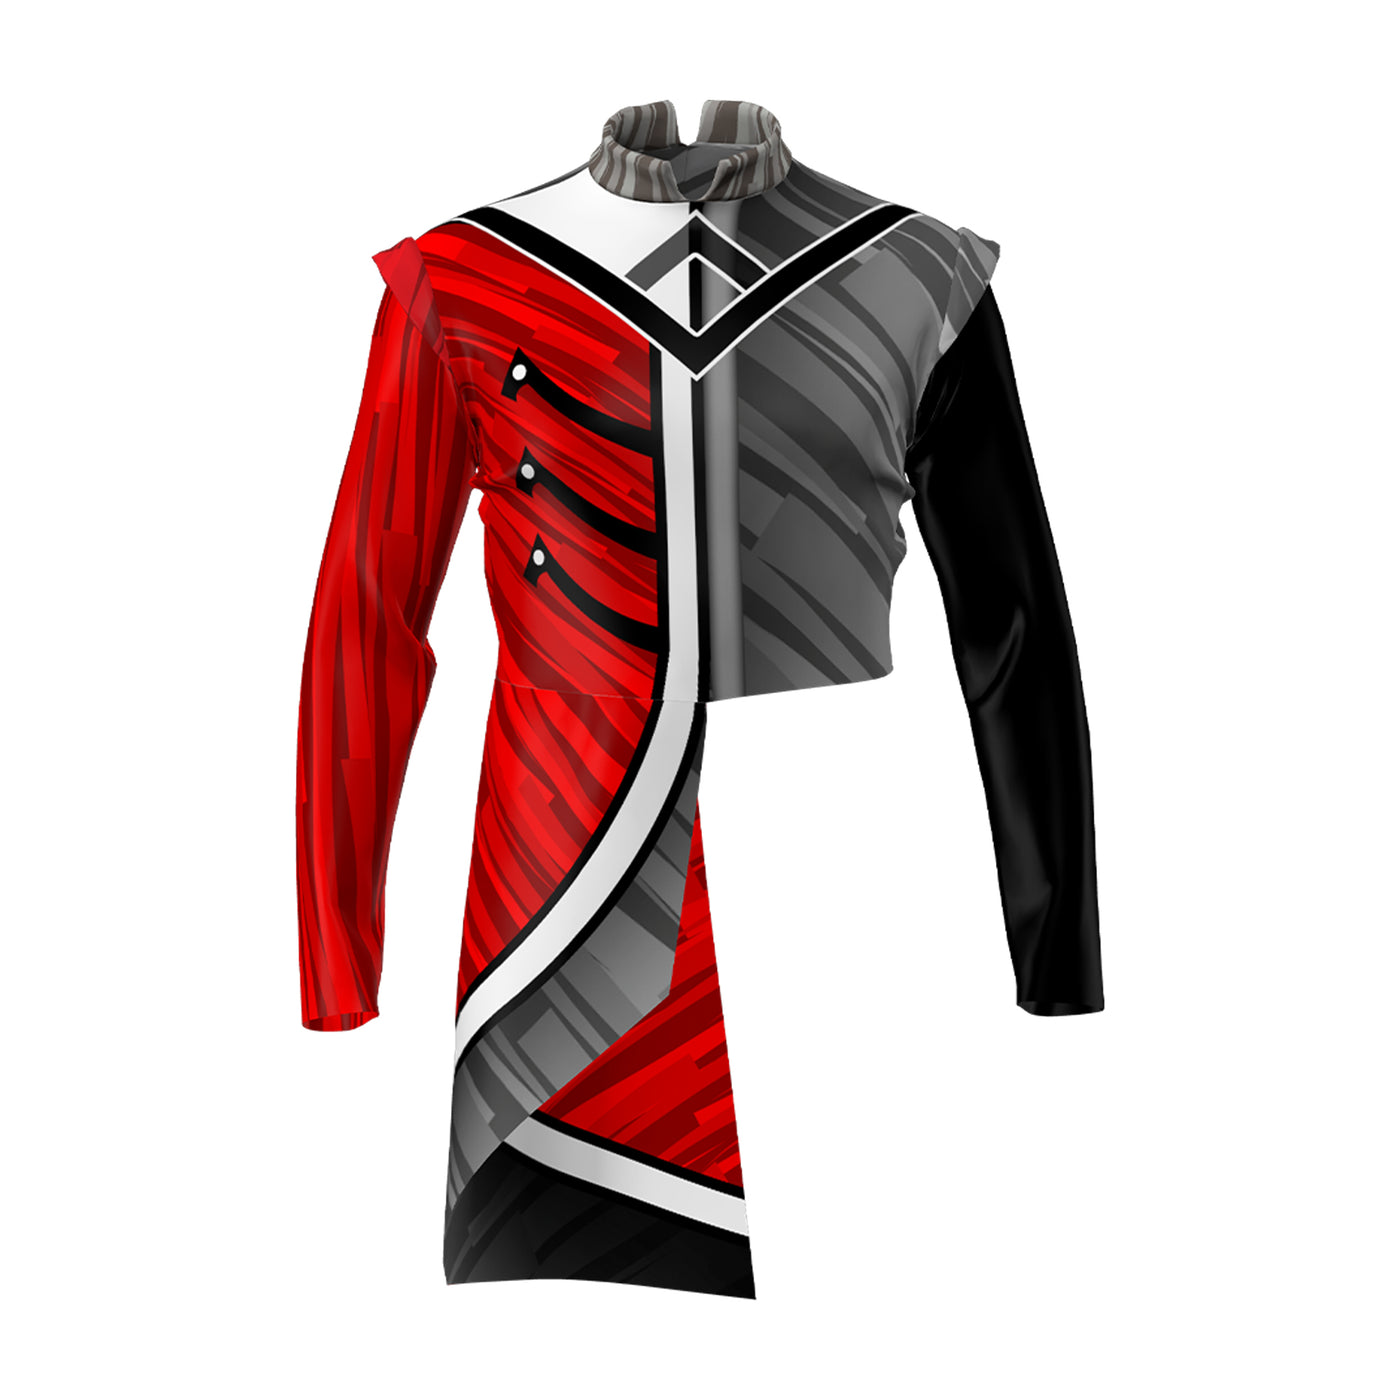 Marching Band Jackets For Sale | BC100 | Bandmans